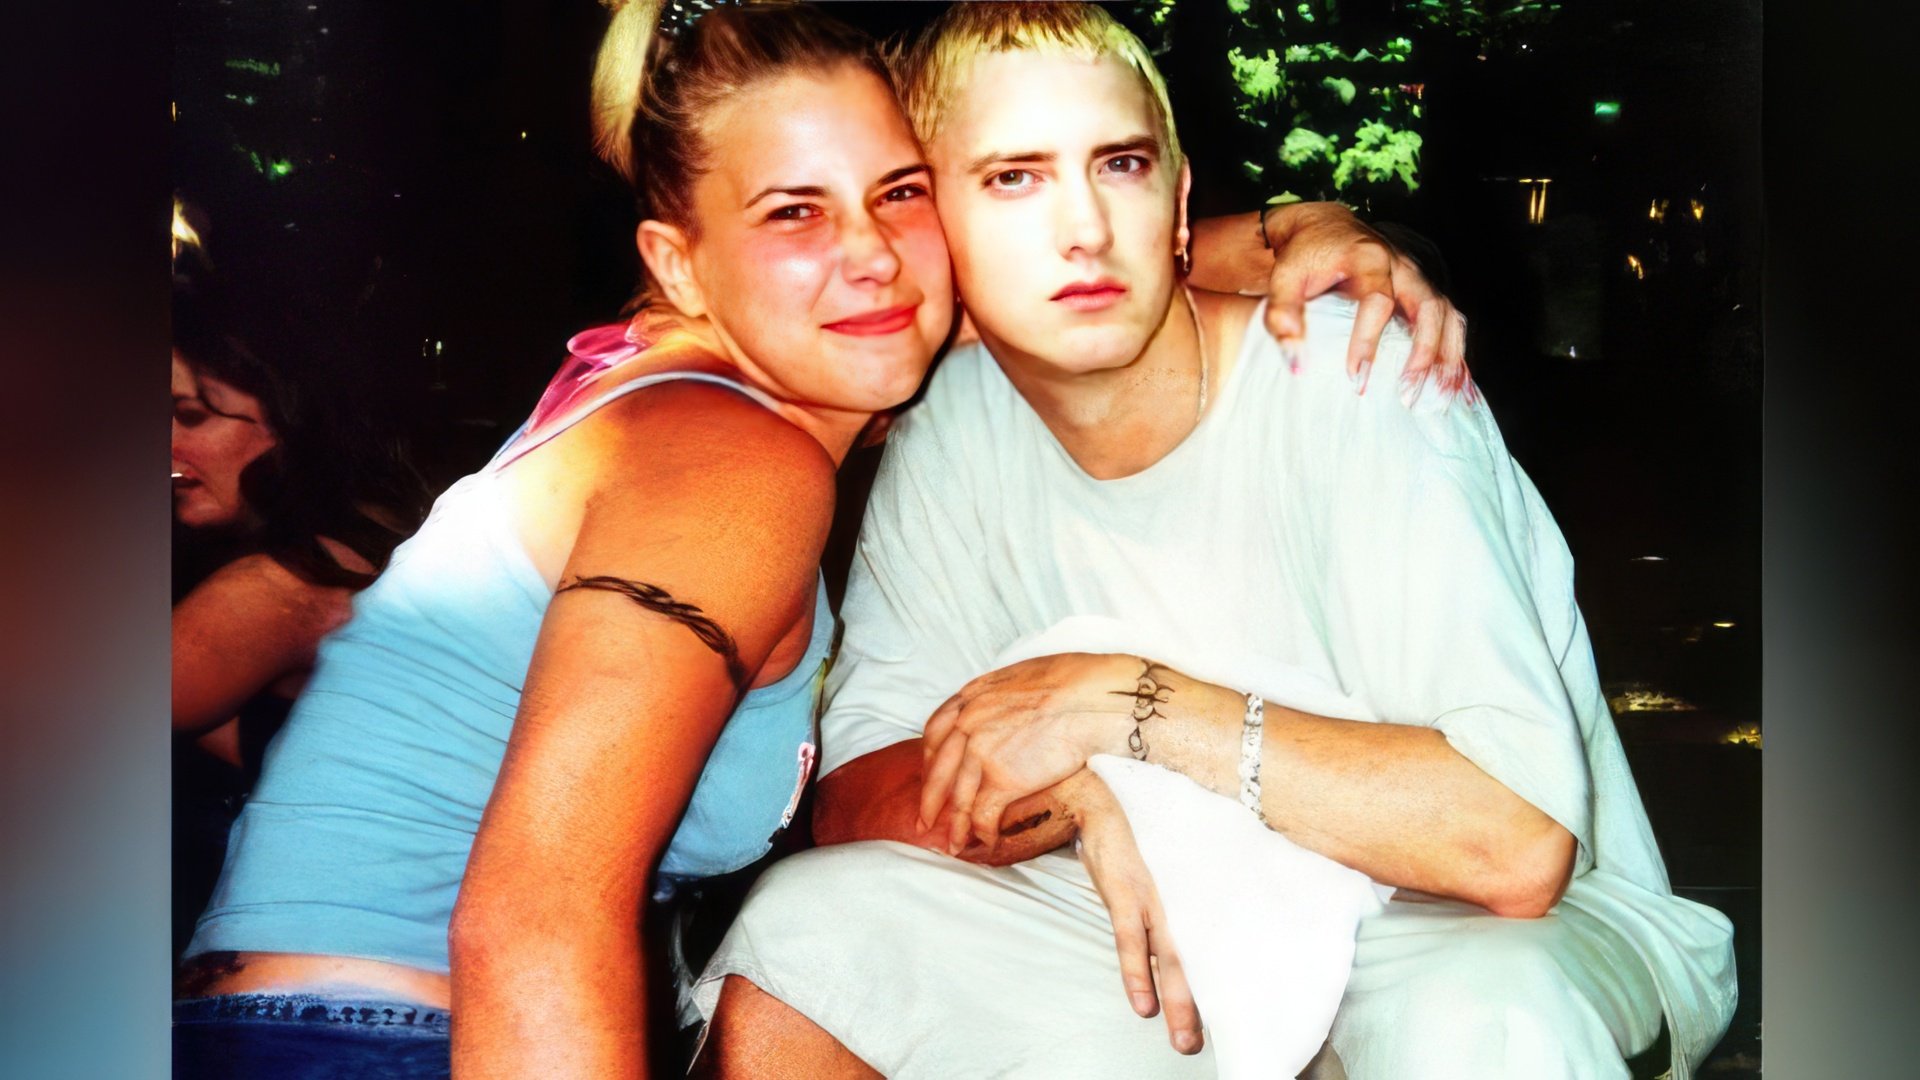 Eminem met his future wife at the age of 15